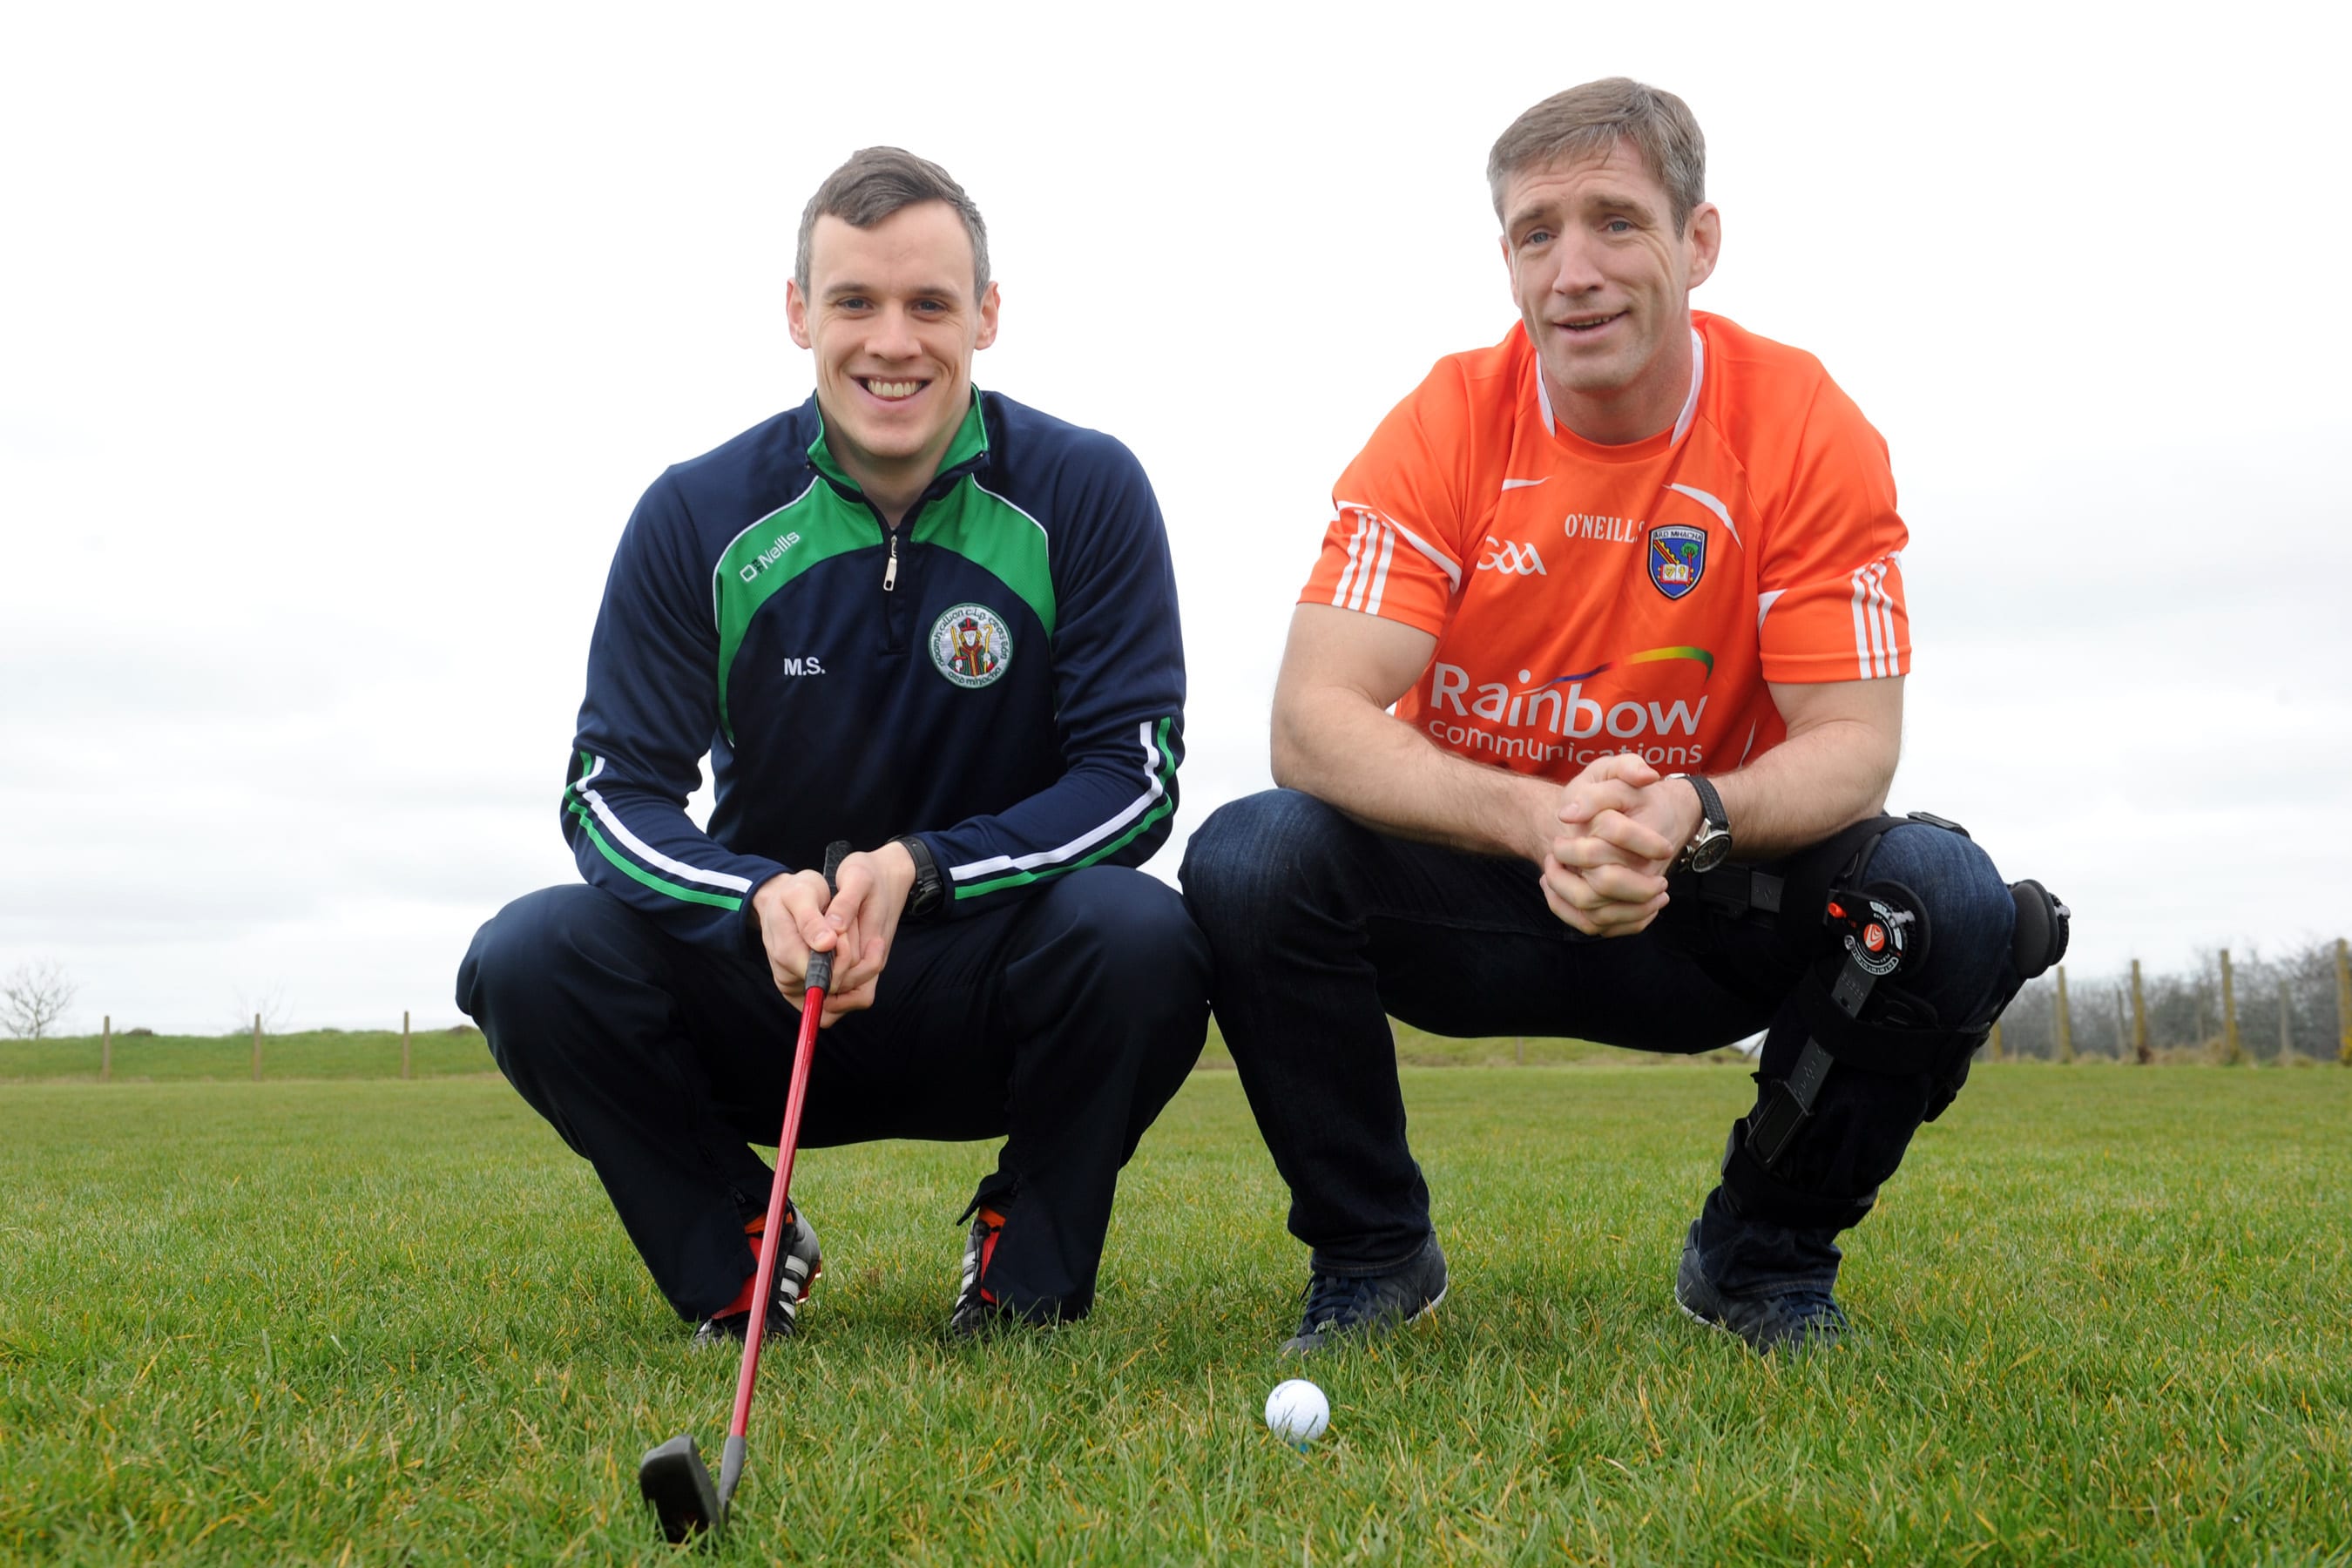 ARMAGH manager Kieran McGeeney and star player Mark Shields launch the St Killians Whitecross GAC Barry Malone Memorial Golf Day, which takes place on Saturday, July 18, at Ashfield Golf Course.